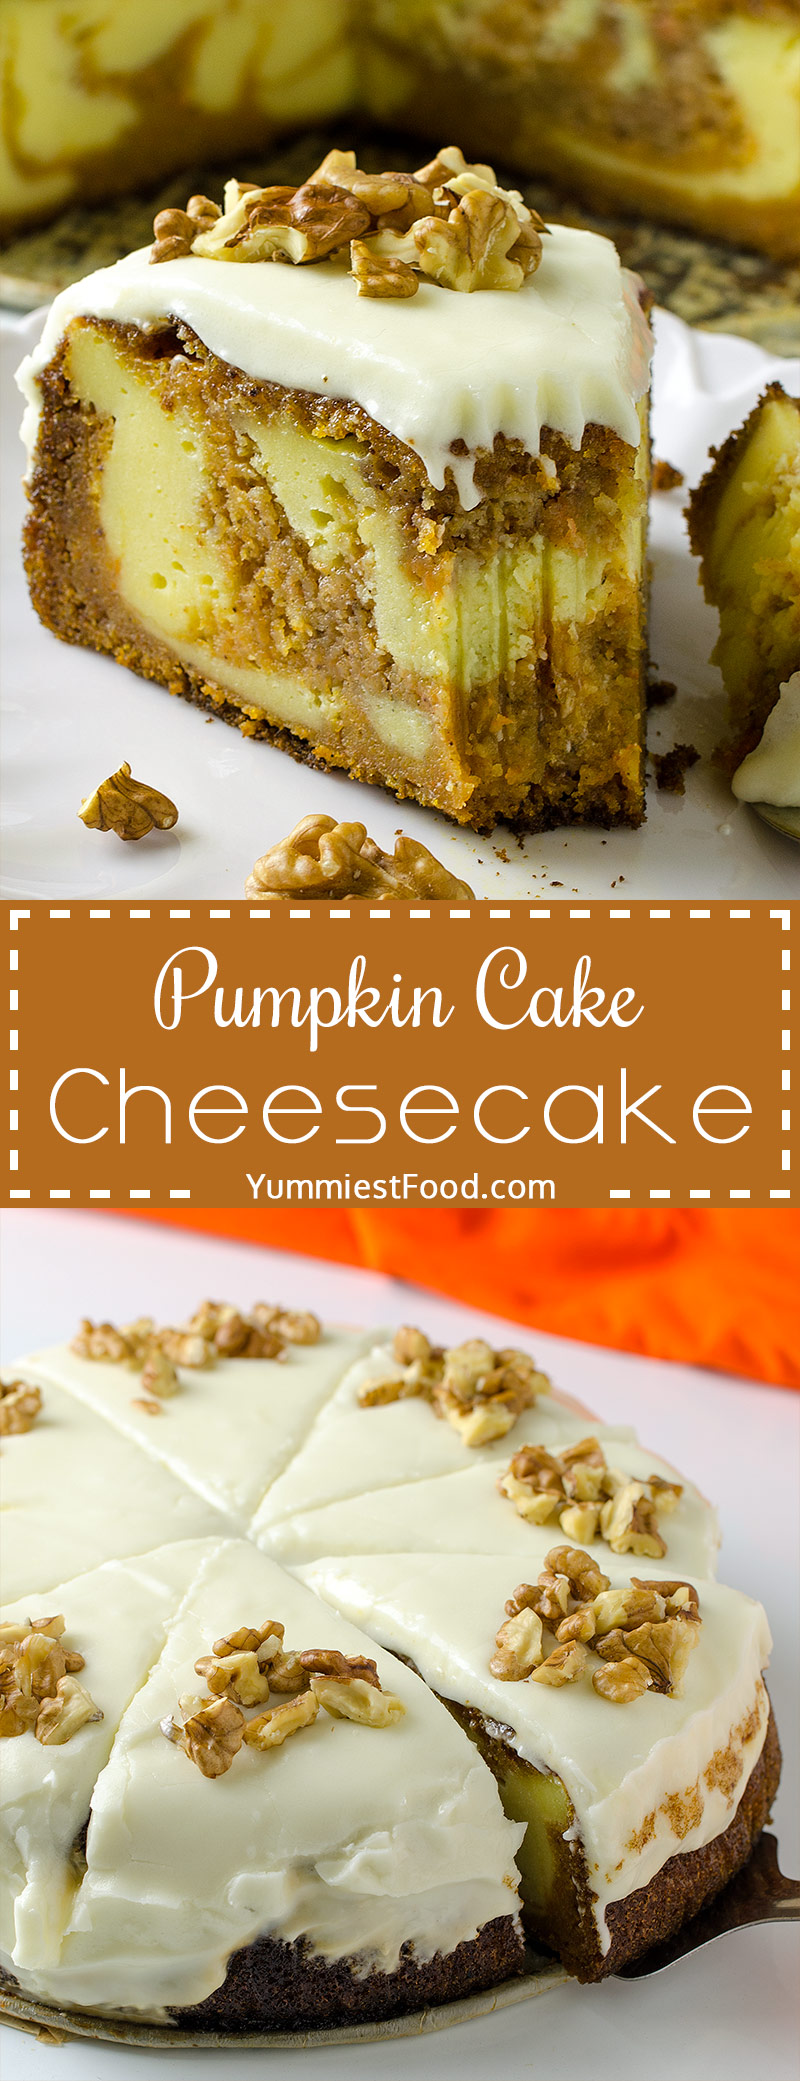 PUMPKIN CAKE CHEESECAKE - No Thanksgiving table is complete without pumpkin cake cheesecake. This perfect recipe is soft, moist, delicious and so very good. The perfect dessert for your Thanksgiving dinner party.